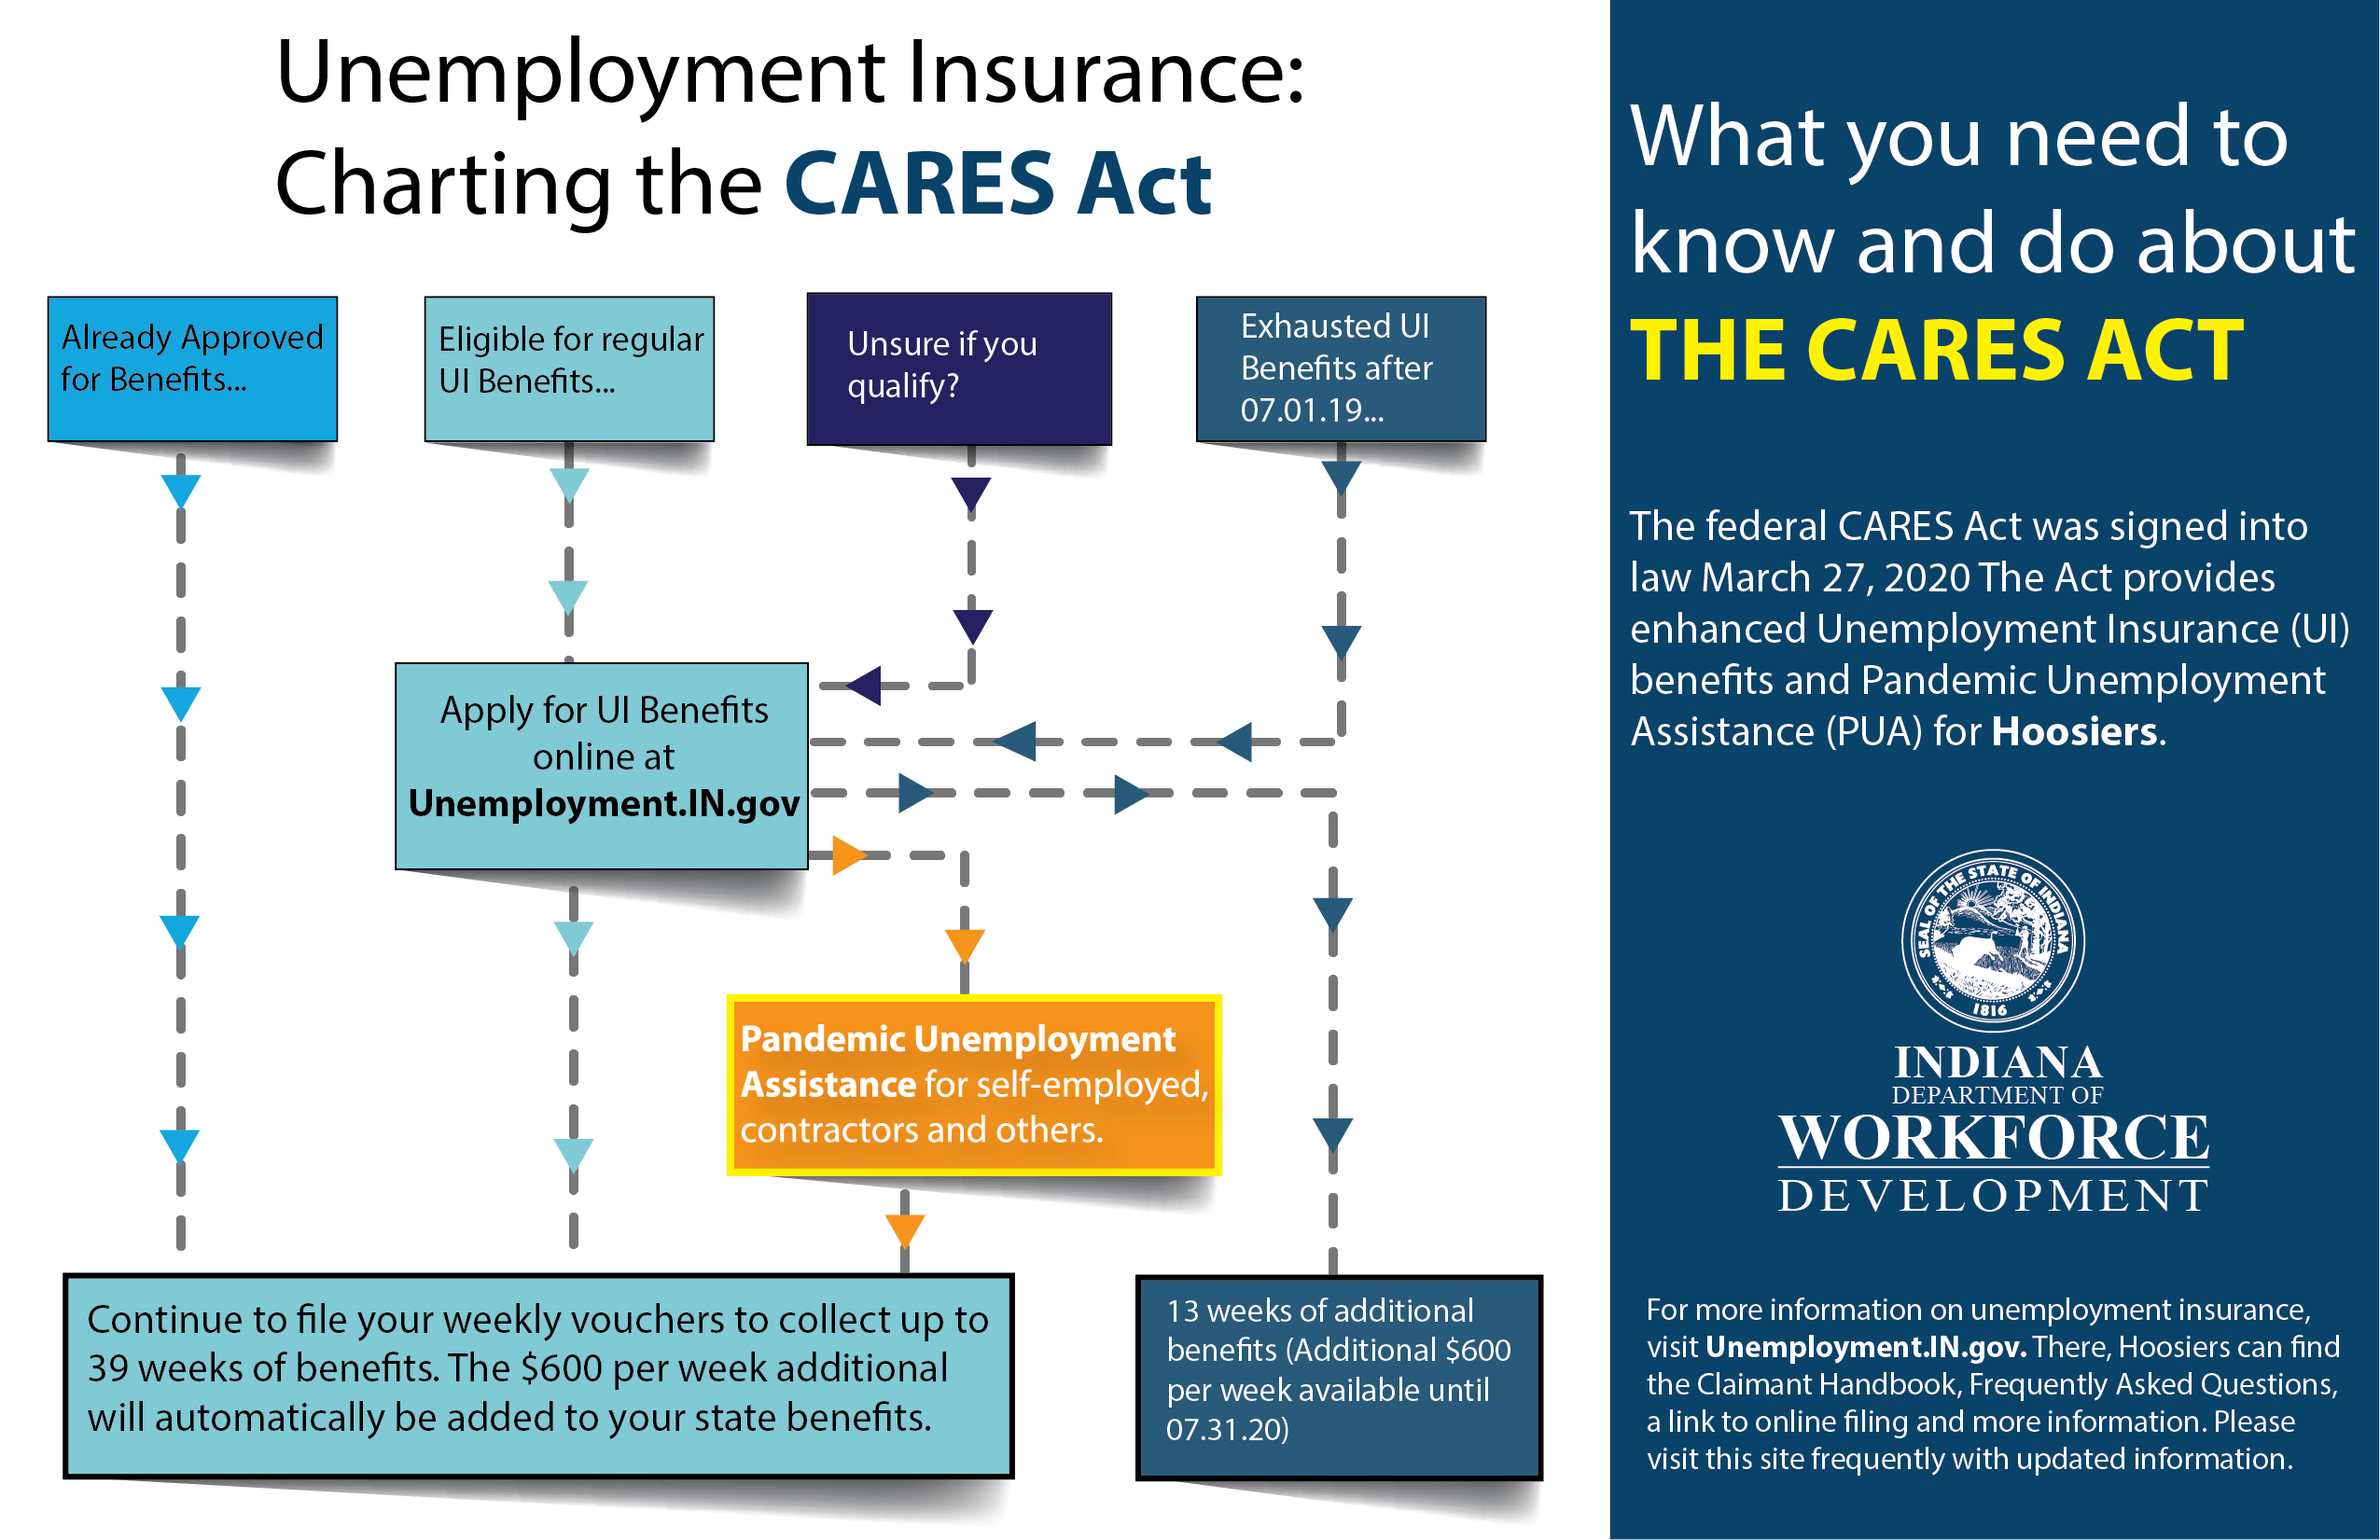 Unemployment Insurance: Charting the CARES Act. This is a clickable image that details scenarios in a flow chart format that people can find themselves in when determine whether to file for UI benefits